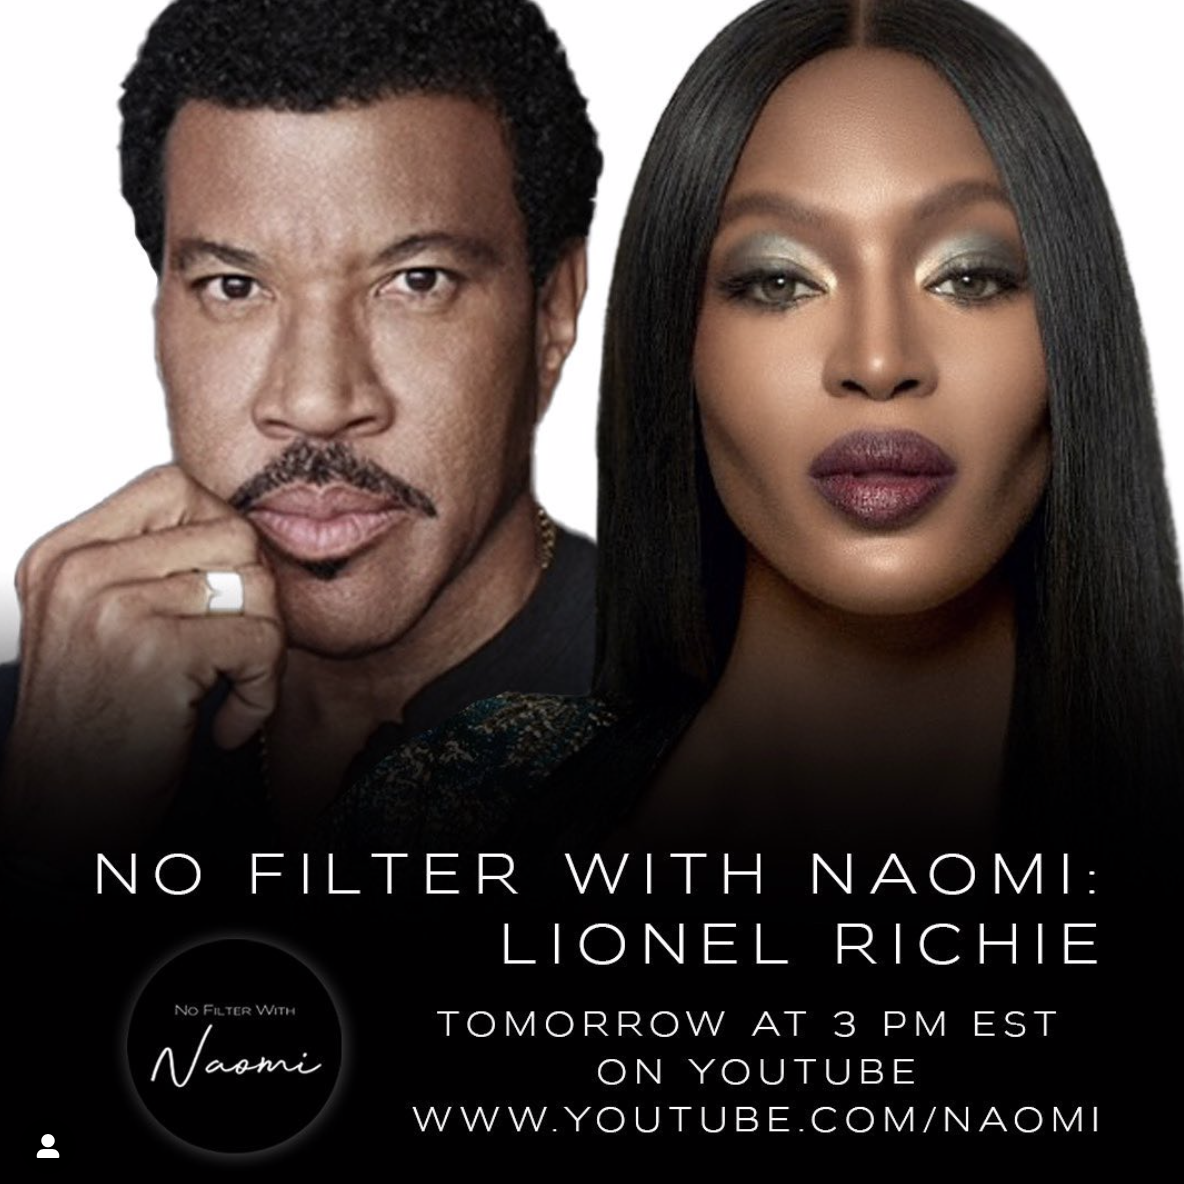 NAOMI CAMPBELL RETURNS WITH ANOTHER EPISODE OF “NO FILTER WITH NAOMI” FEATURING LIONEL RICHIE